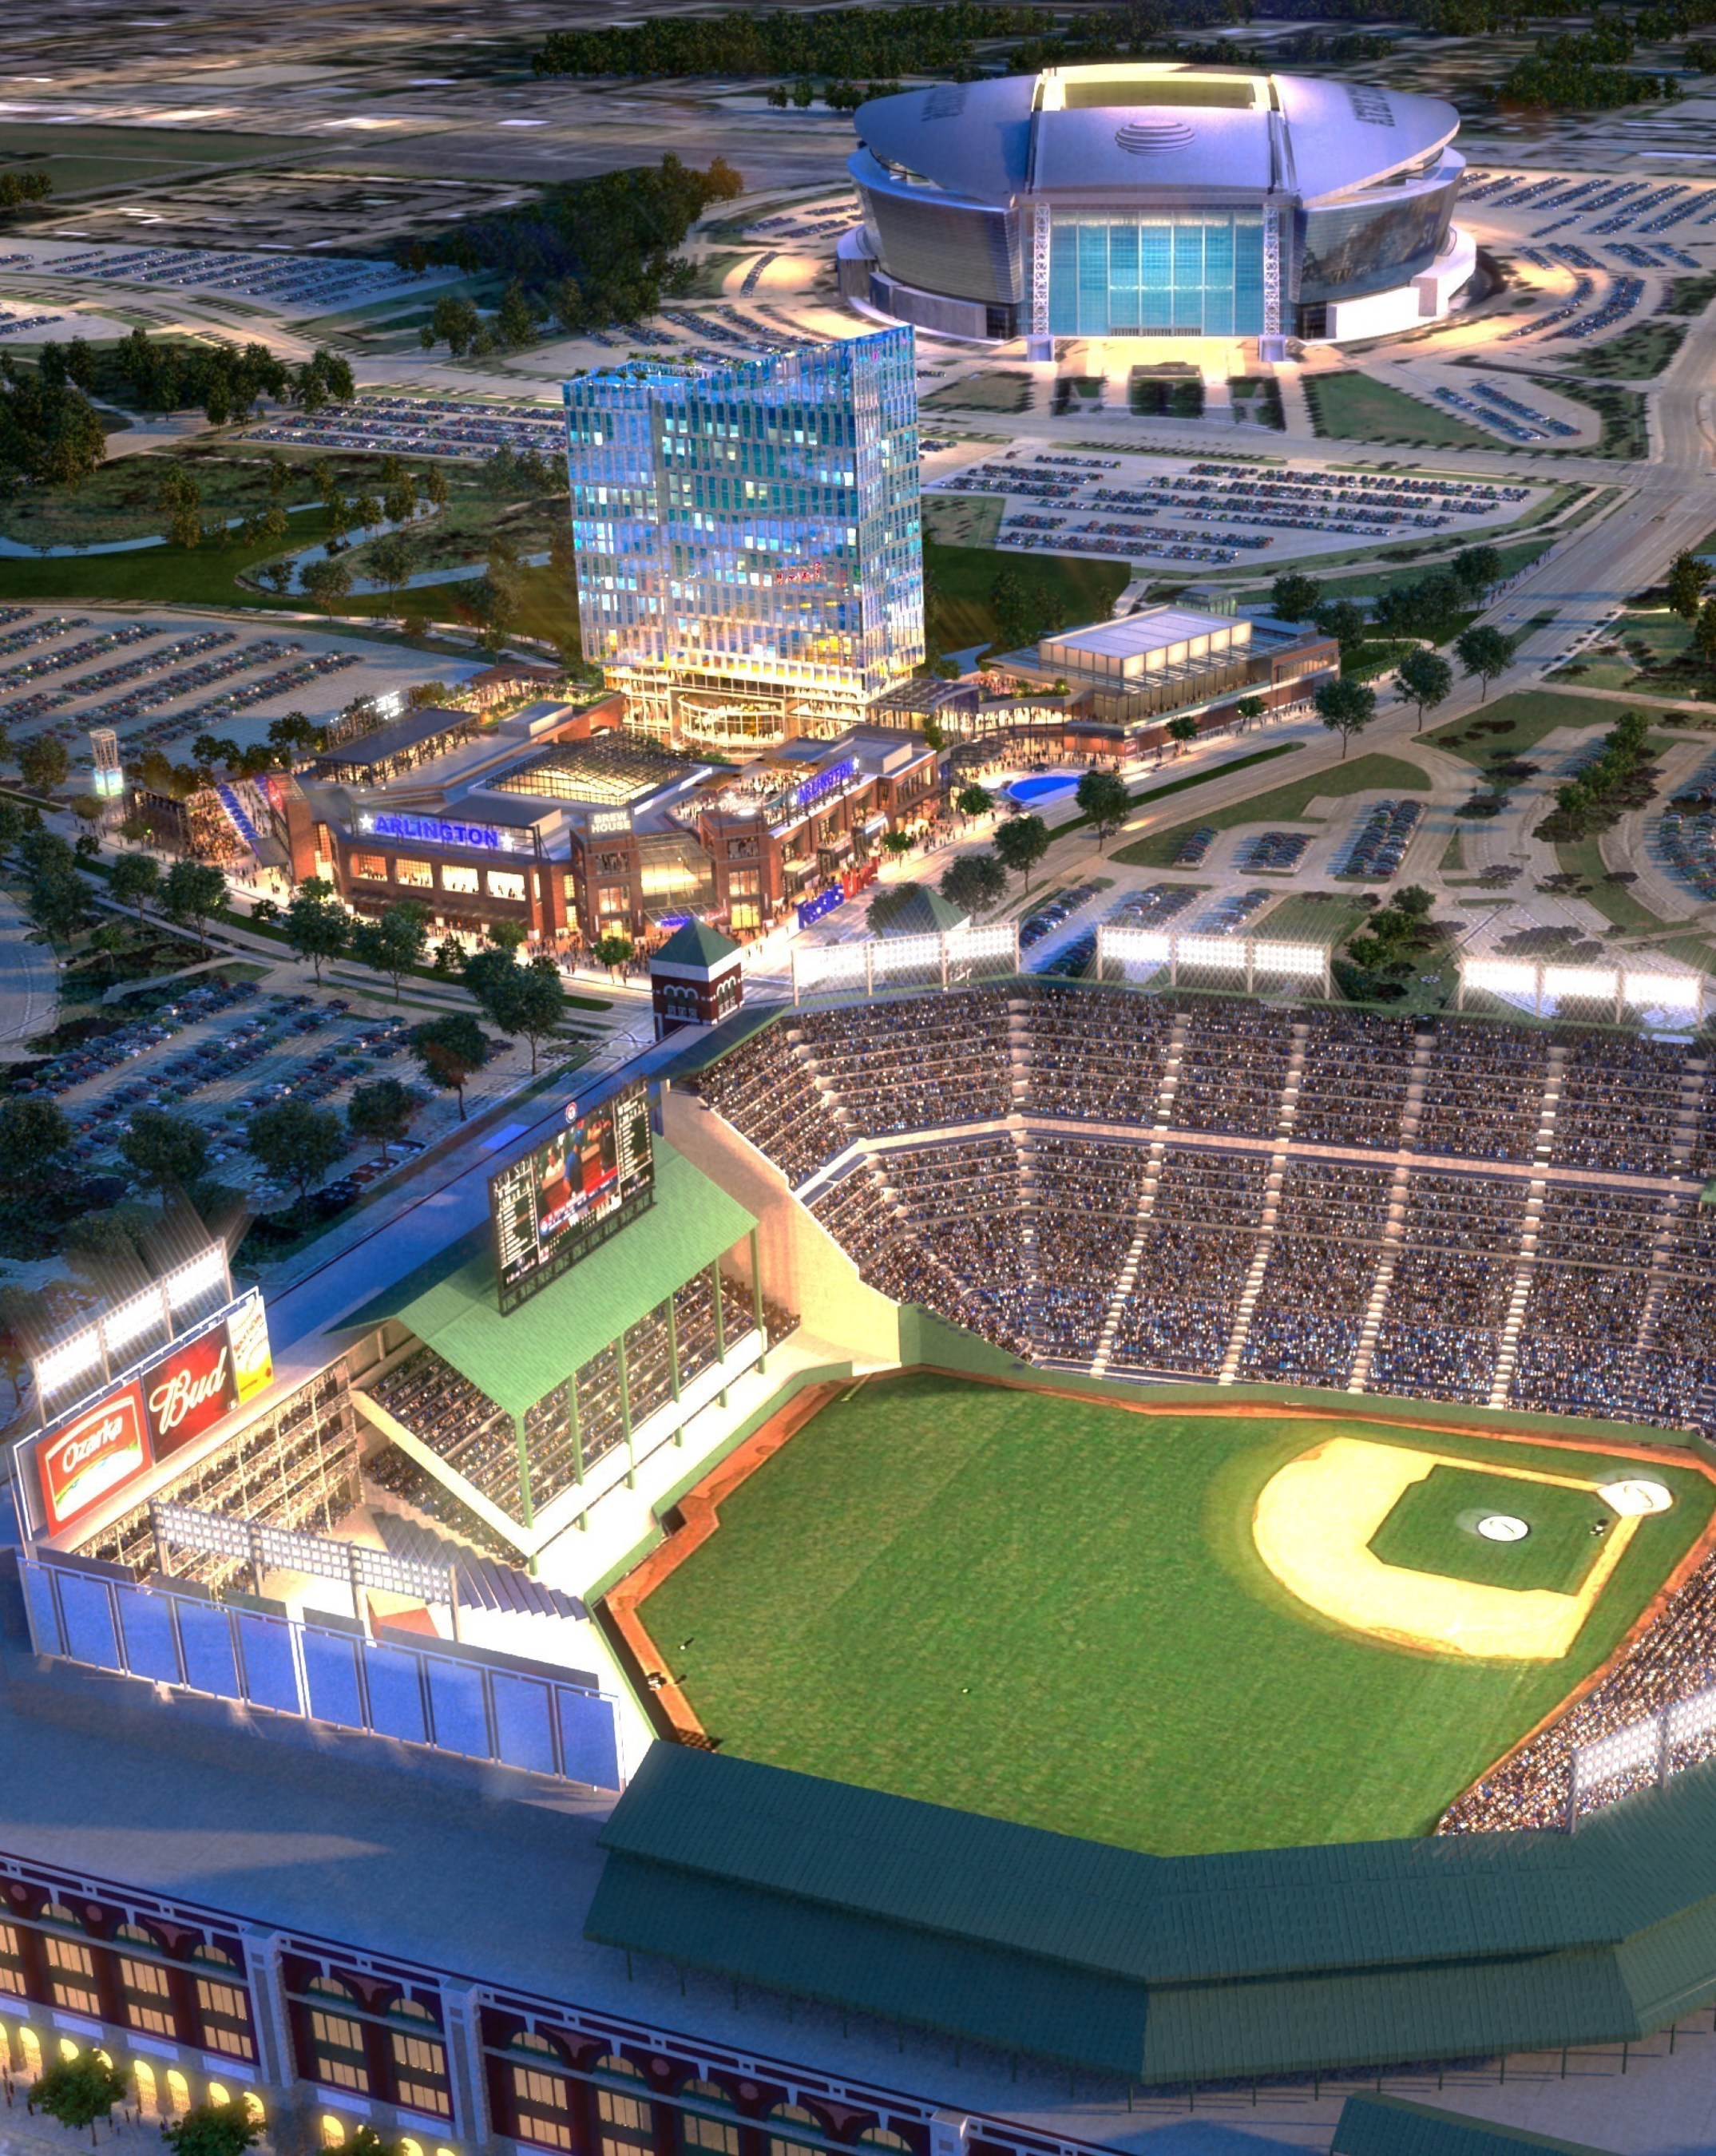 The Cordish Companies have been selected by The Texas Rangers as development partner for Texas Live!, a 100,000 square foot world-class dining and entertainment district, as well as a 300-room hotel and 35,000 square foot convention facility in-between the Texas Rangers' Globe Life Park in Arlington and the Dallas Cowboys' AT&T Stadium